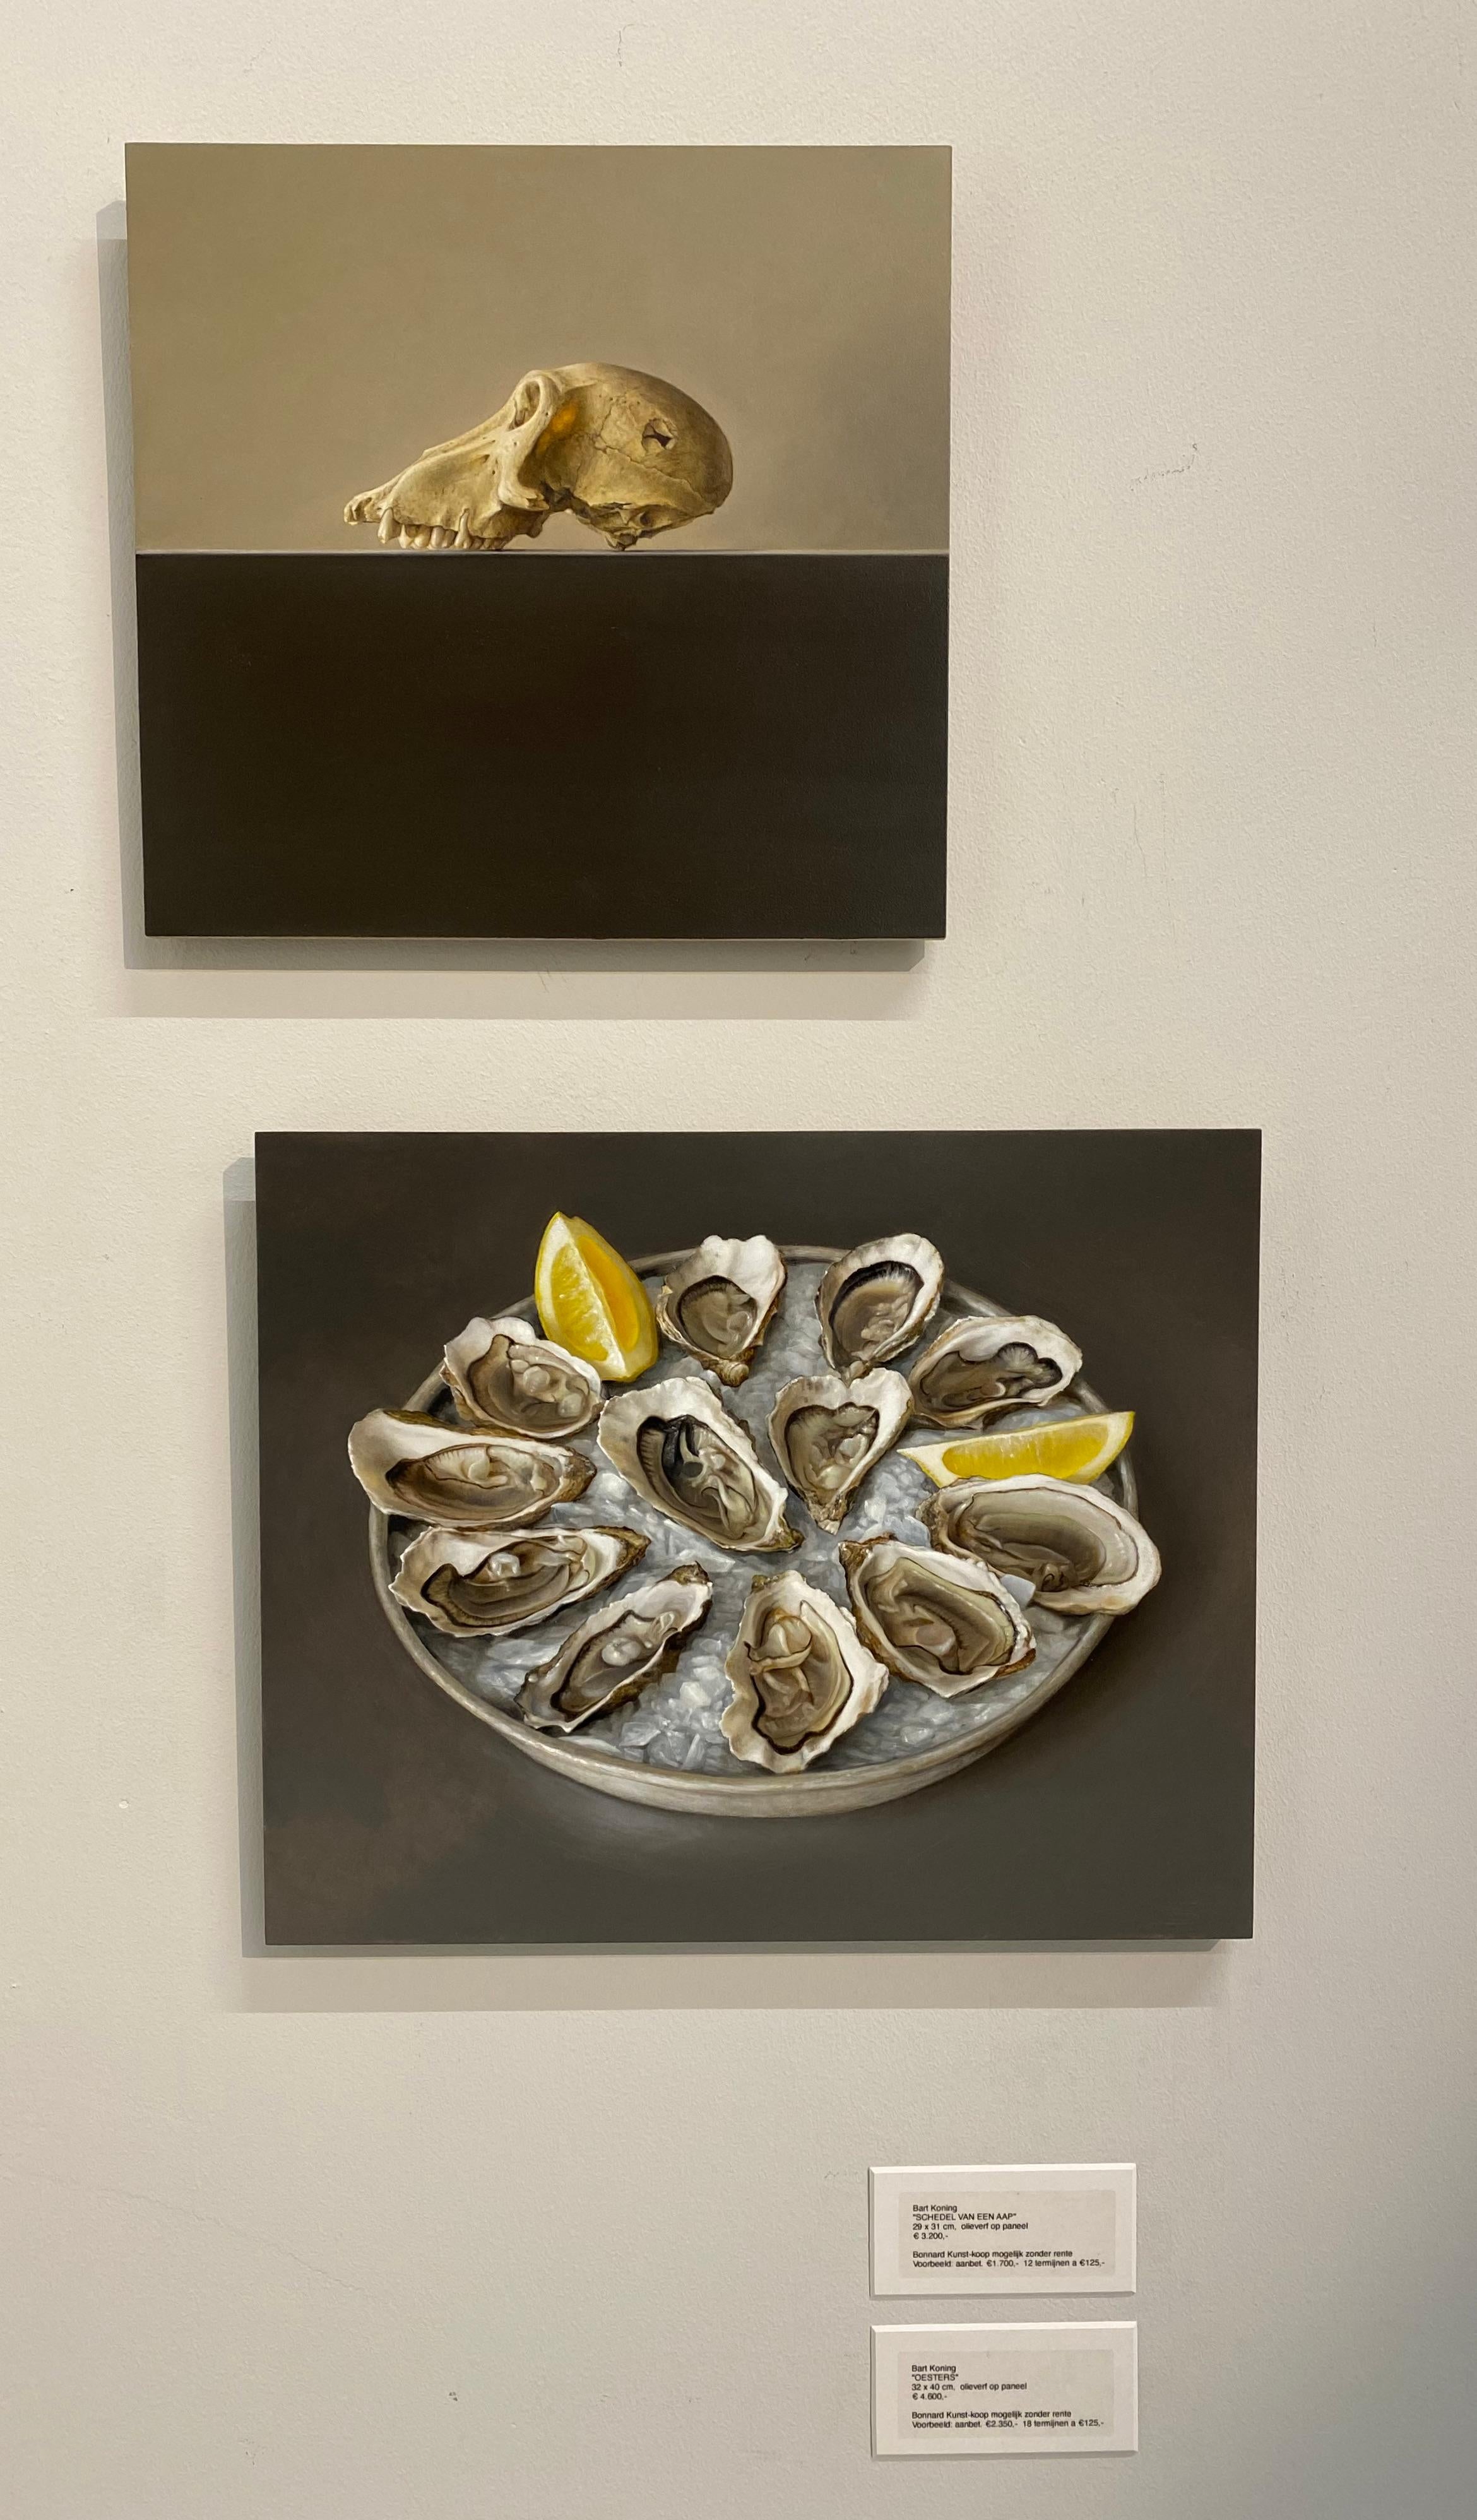 Oysters - 21st Century Still-life painting of a plate with Oysters , Ice & Lemon - Painting by Bart Koning